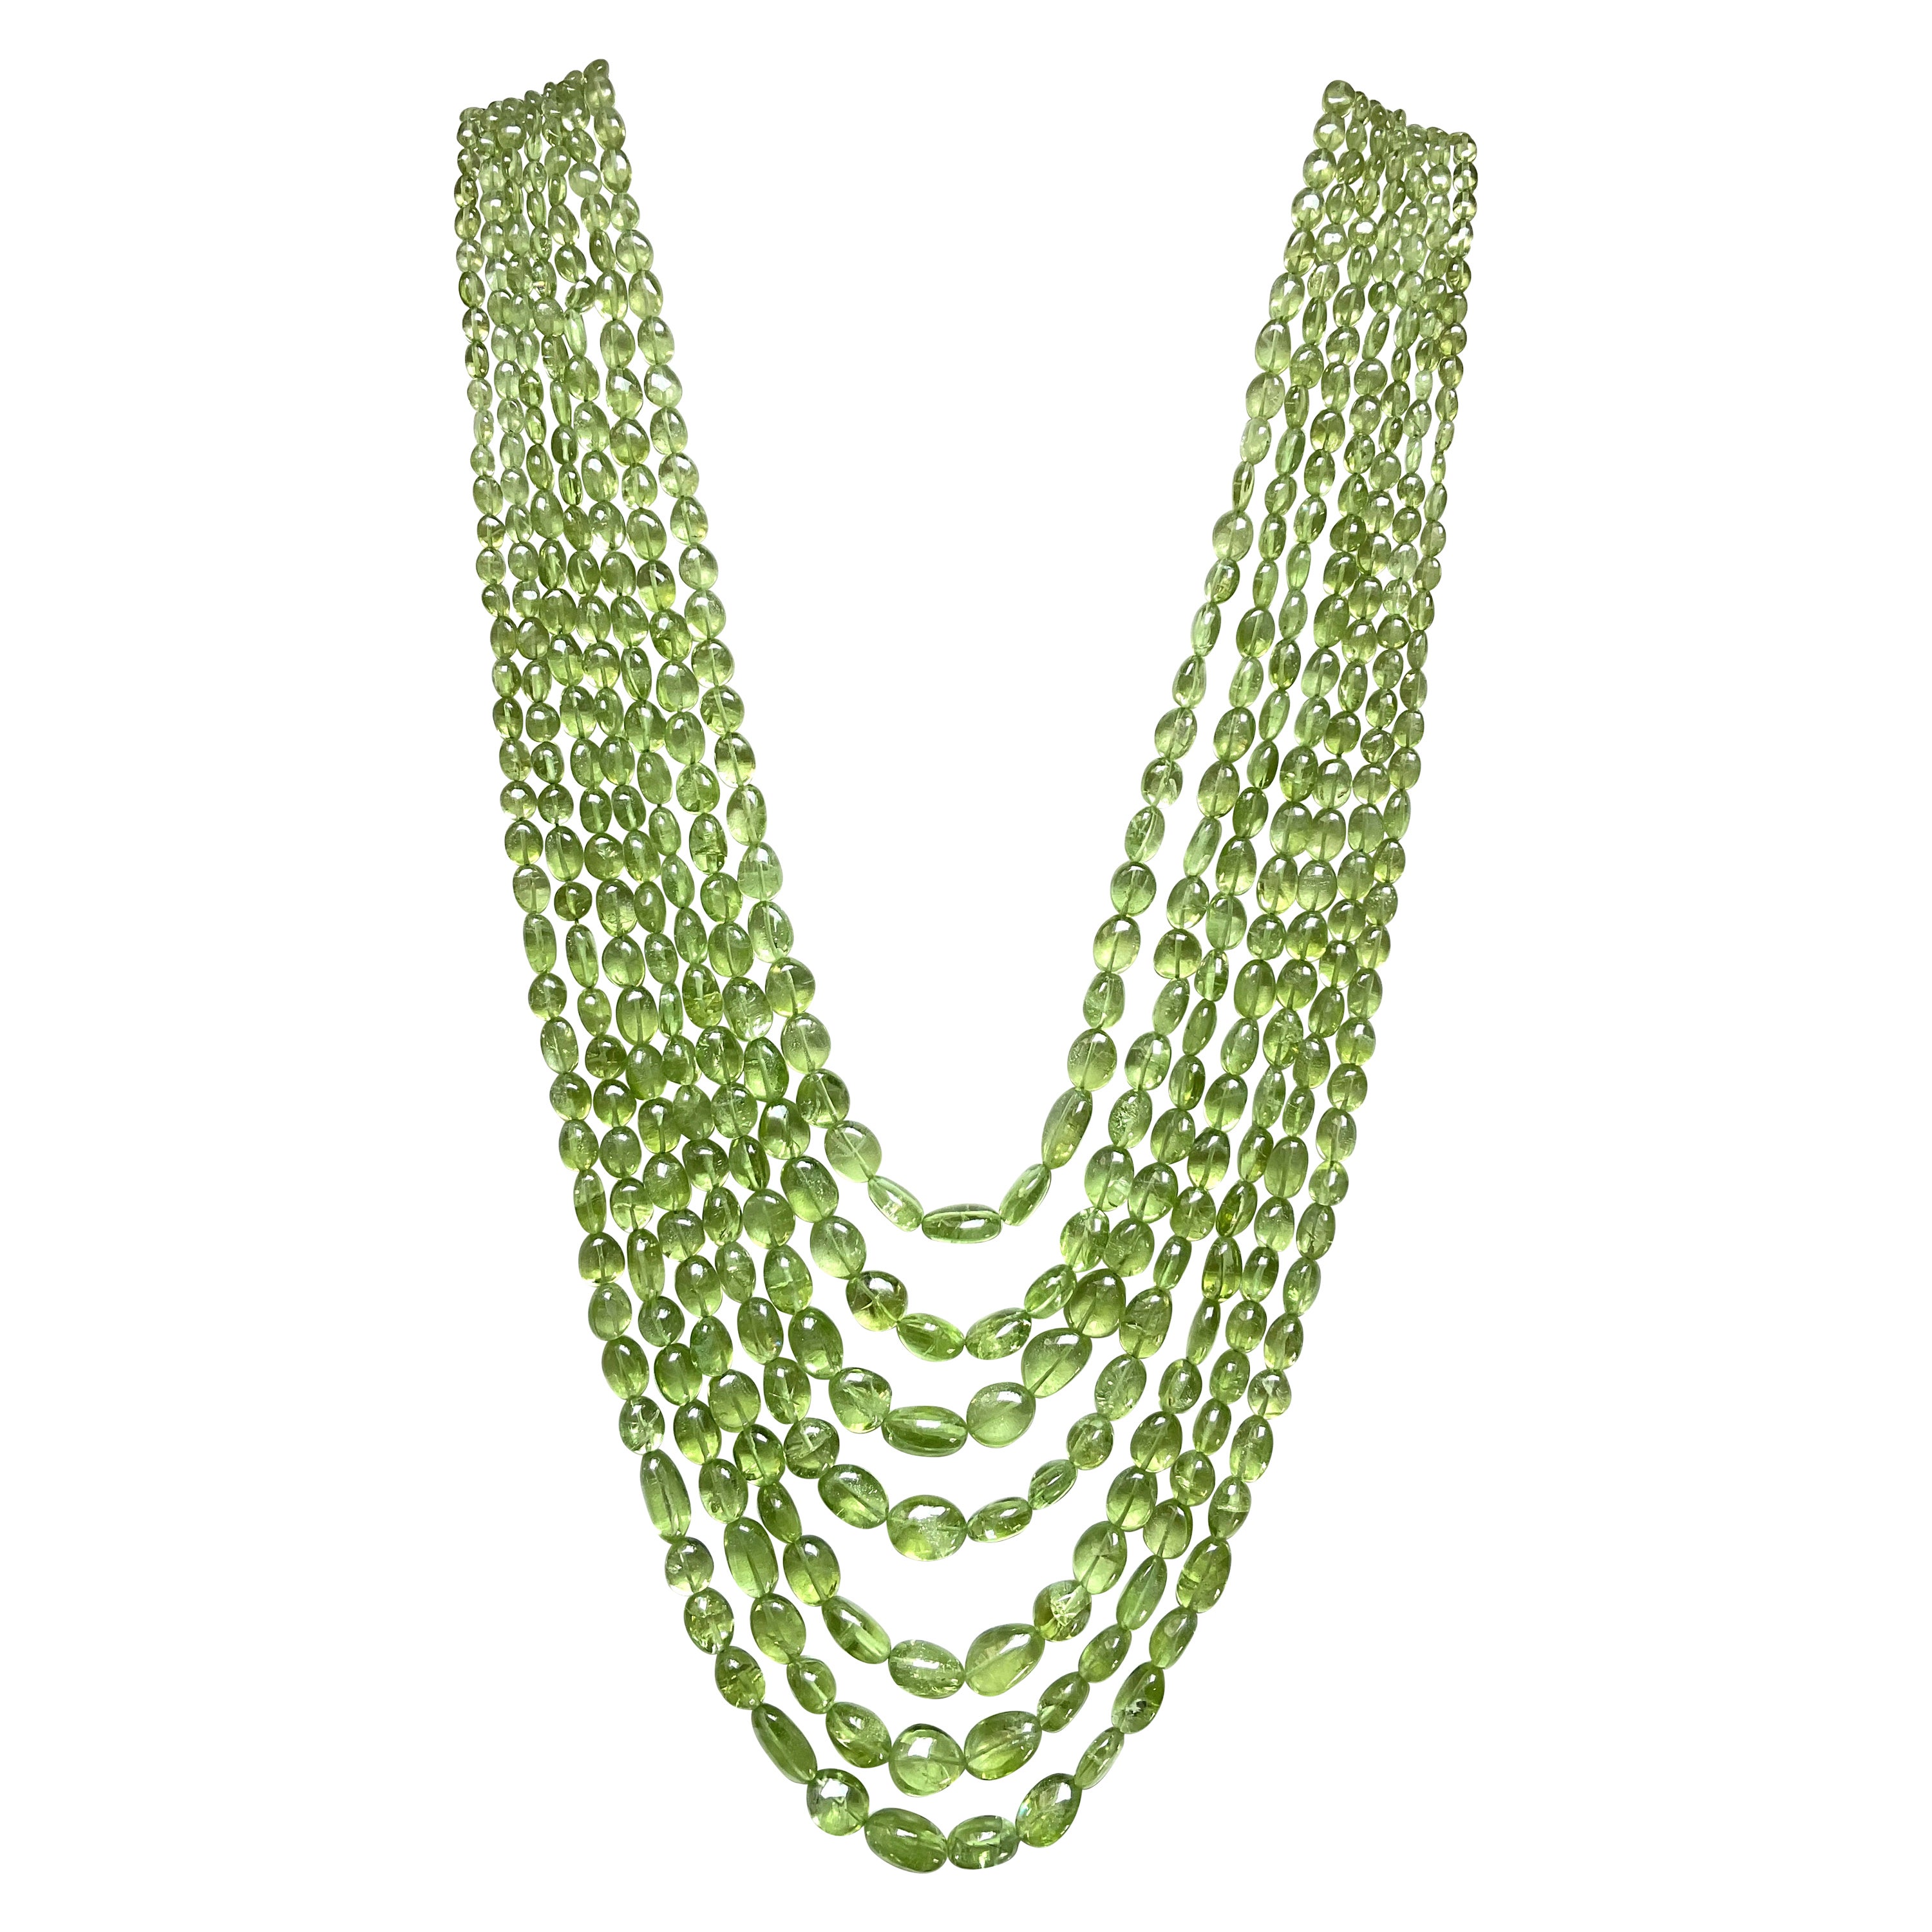 1055.55 carat apple green peridot top quality plain tumbled natural necklace gem For Sale